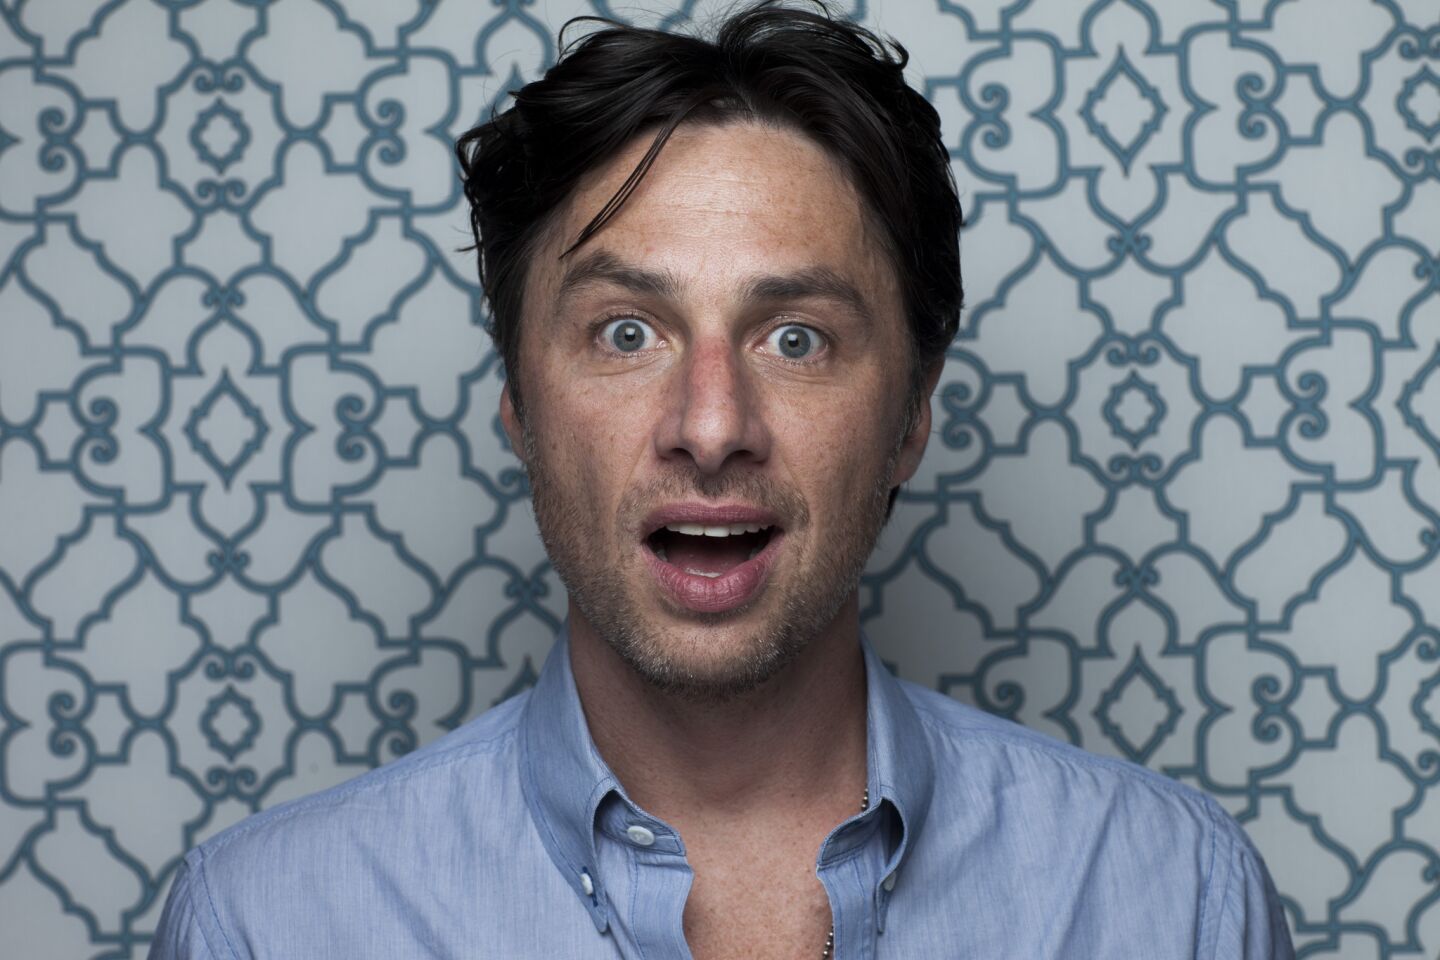 The "Scrubs" star took matters into his own hands when a fake CNN story alleged that he had committed suicide. Braff made a personal video to let his fans know he was OK and that he would never kill himself using pills -- he would opt for pots and pans instead.